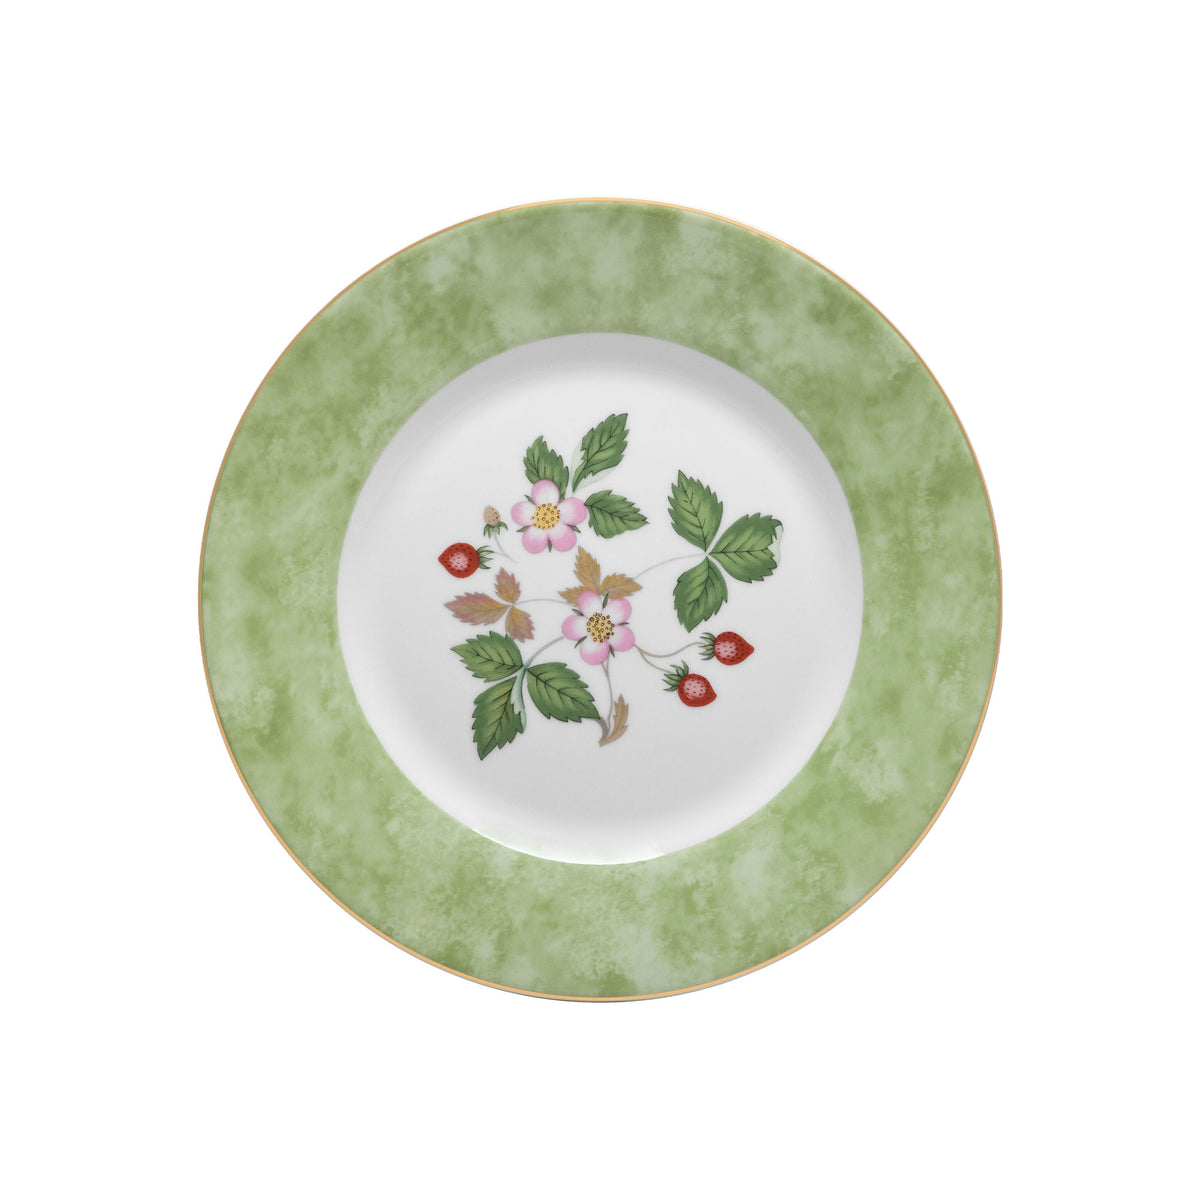 Wild Strawberry Accent Salad Plate 8"